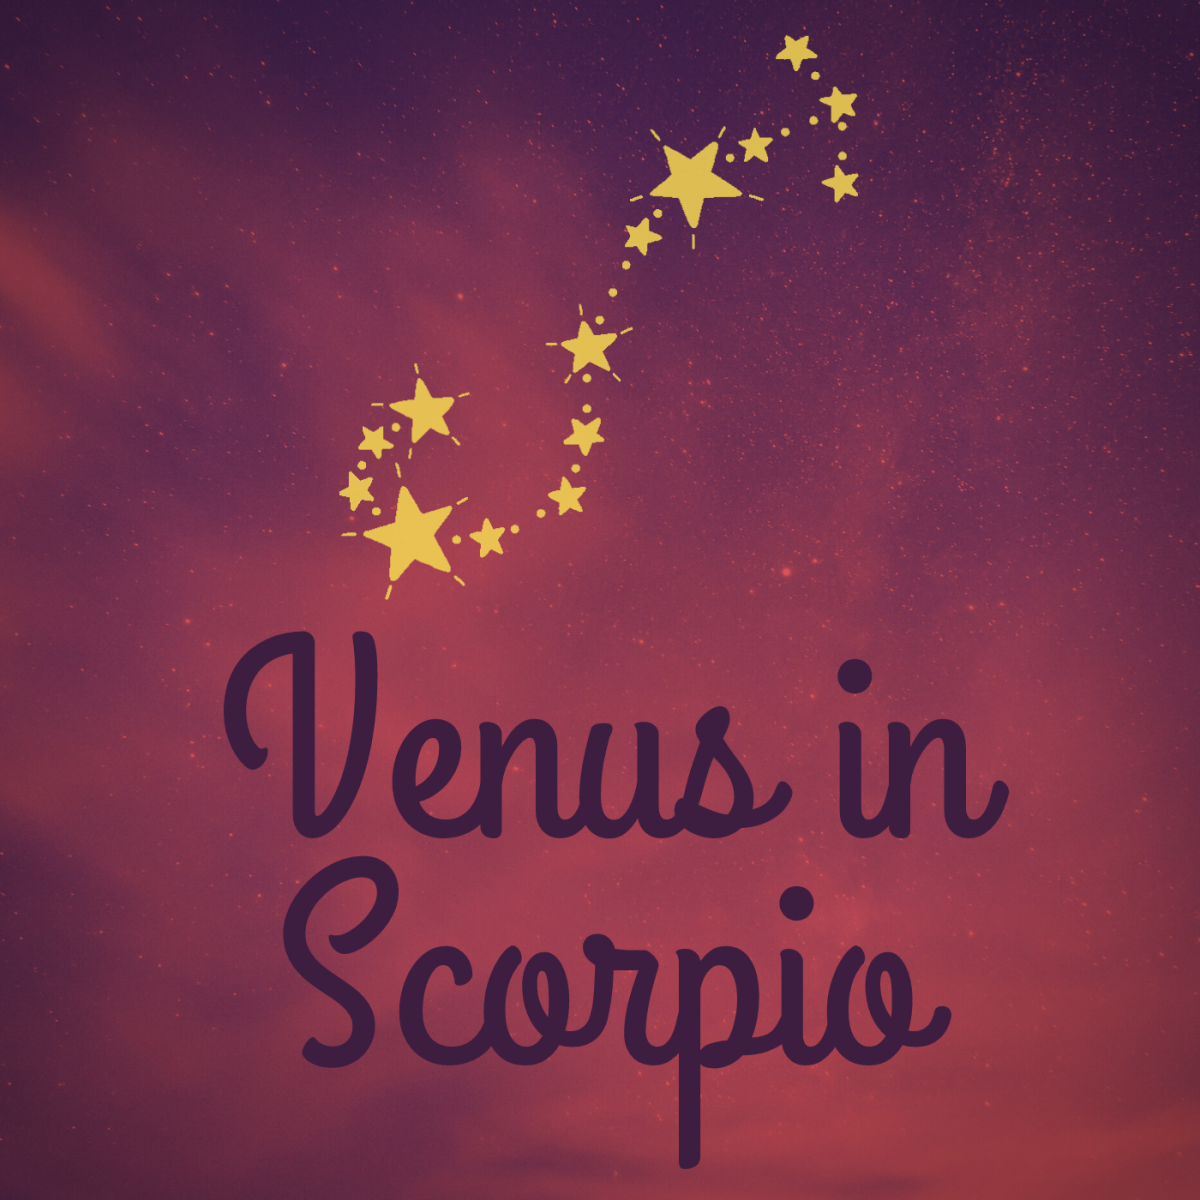 What does it mean for your love life when Venus is in Scorpio in your natal chart?